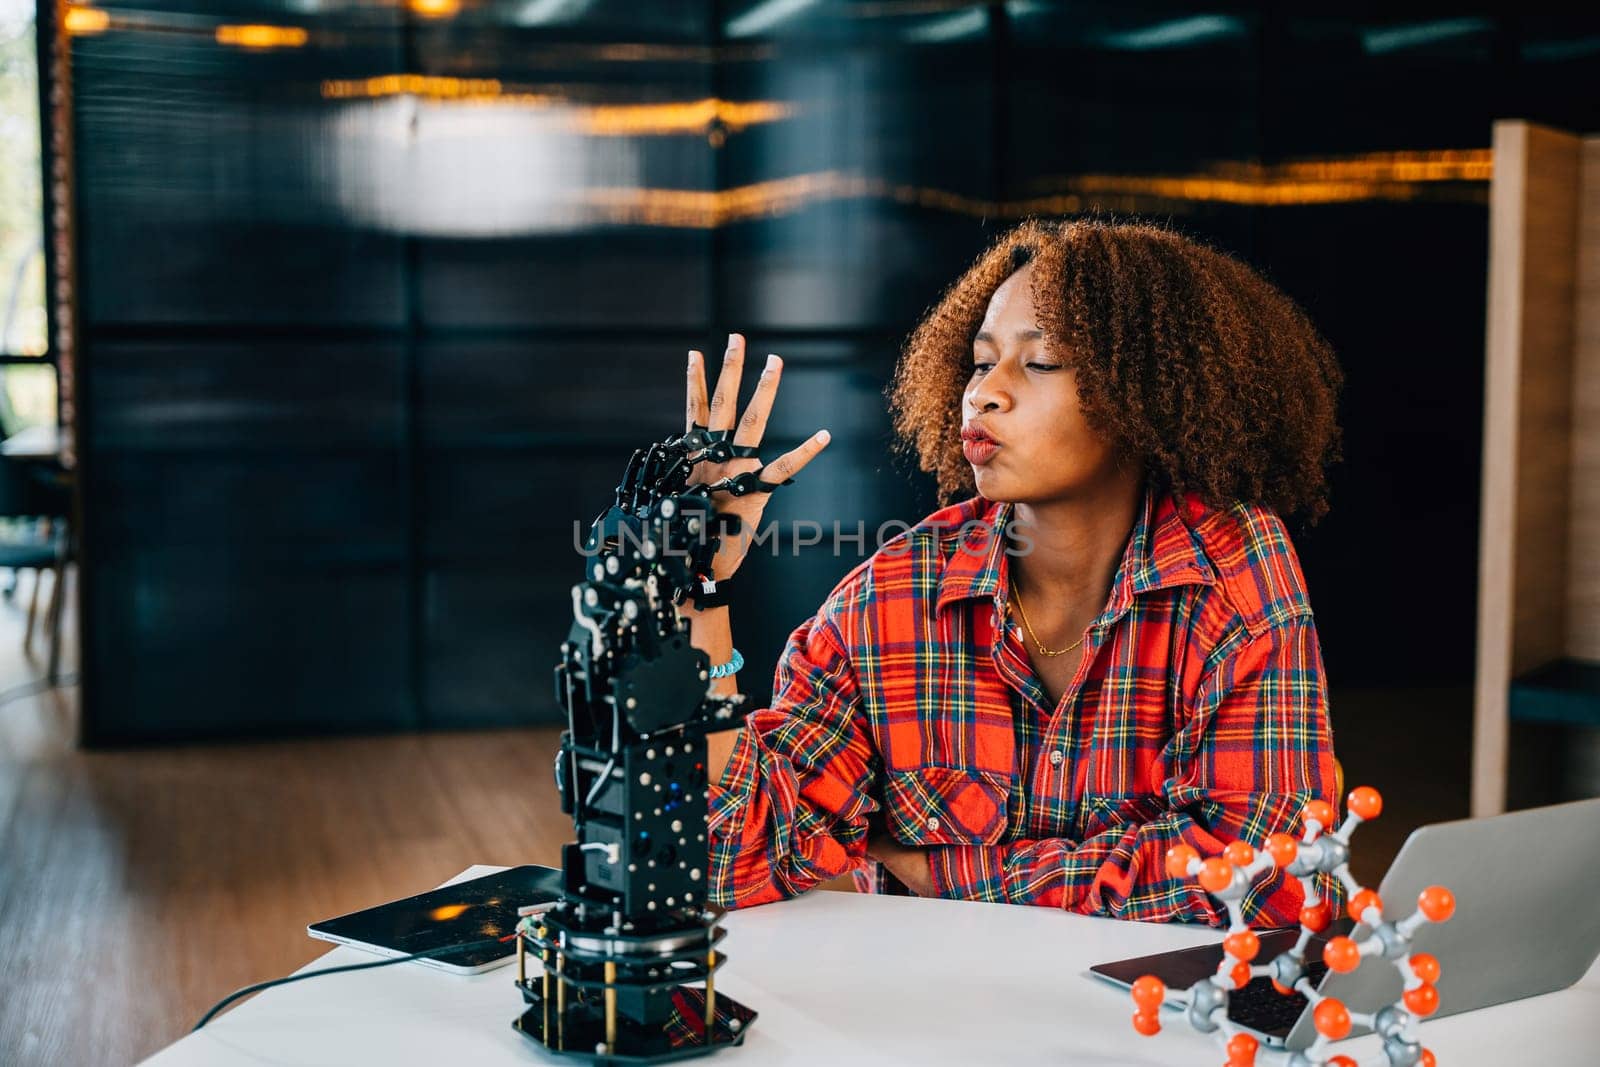 Smart teenager joyfully explores a humanoid robotic hand learning in a classroom setting. Embracing science and technology fostering innovation intelligence and skill development.